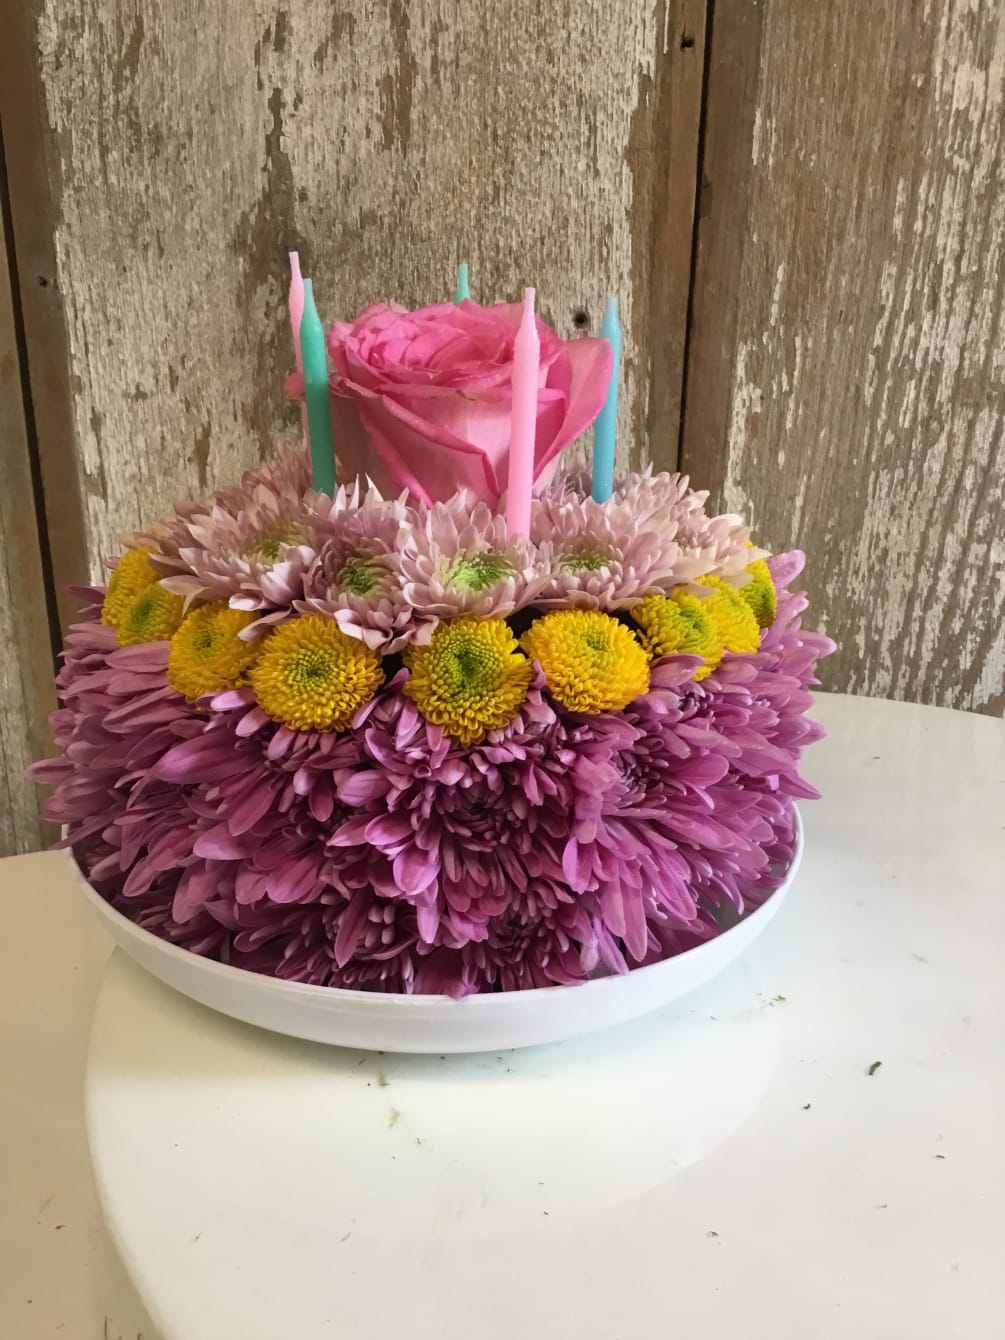 Assorted mums, Daisies, Roses or Buttons in the shape of a Cake